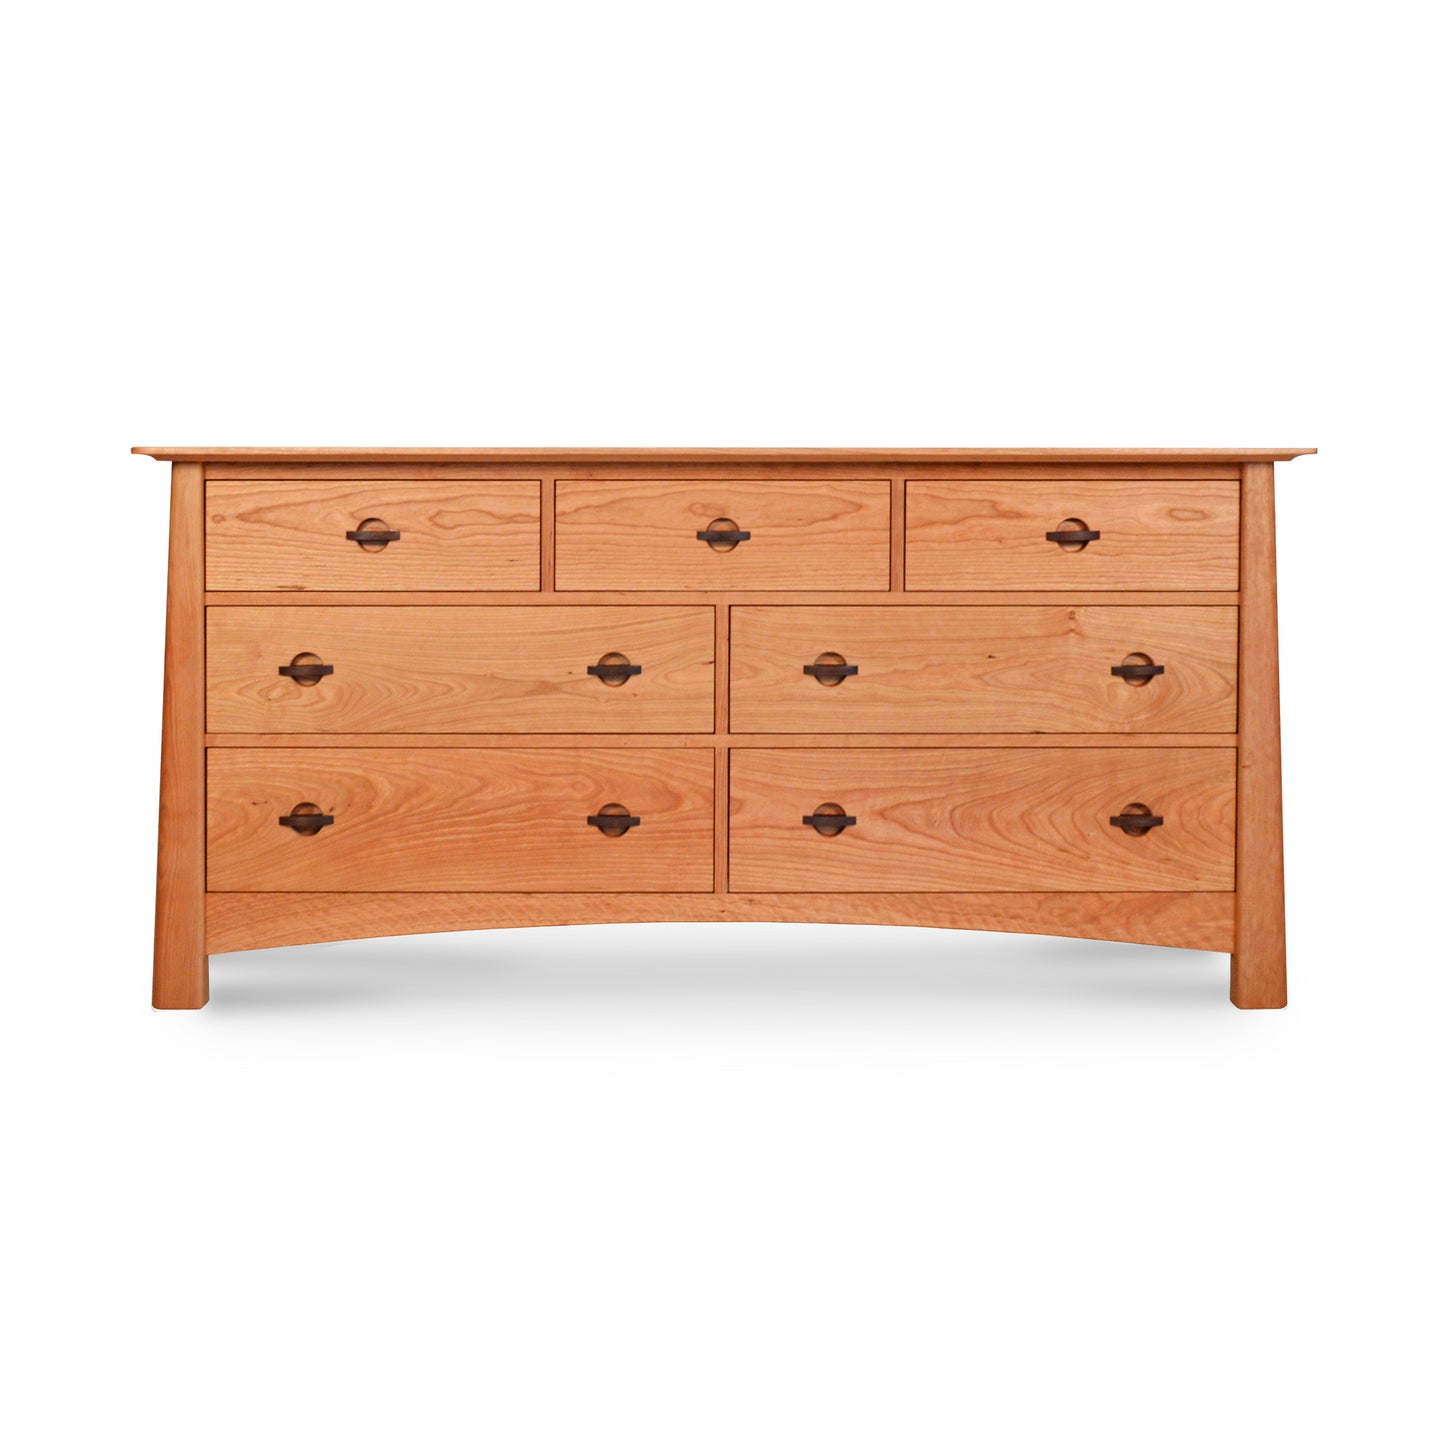 A luxury Maple Corner Woodworks Cherry Moon 7-Drawer Dresser with six small drawers at the top and three larger drawers below, all with round knobs, isolated against a white background.